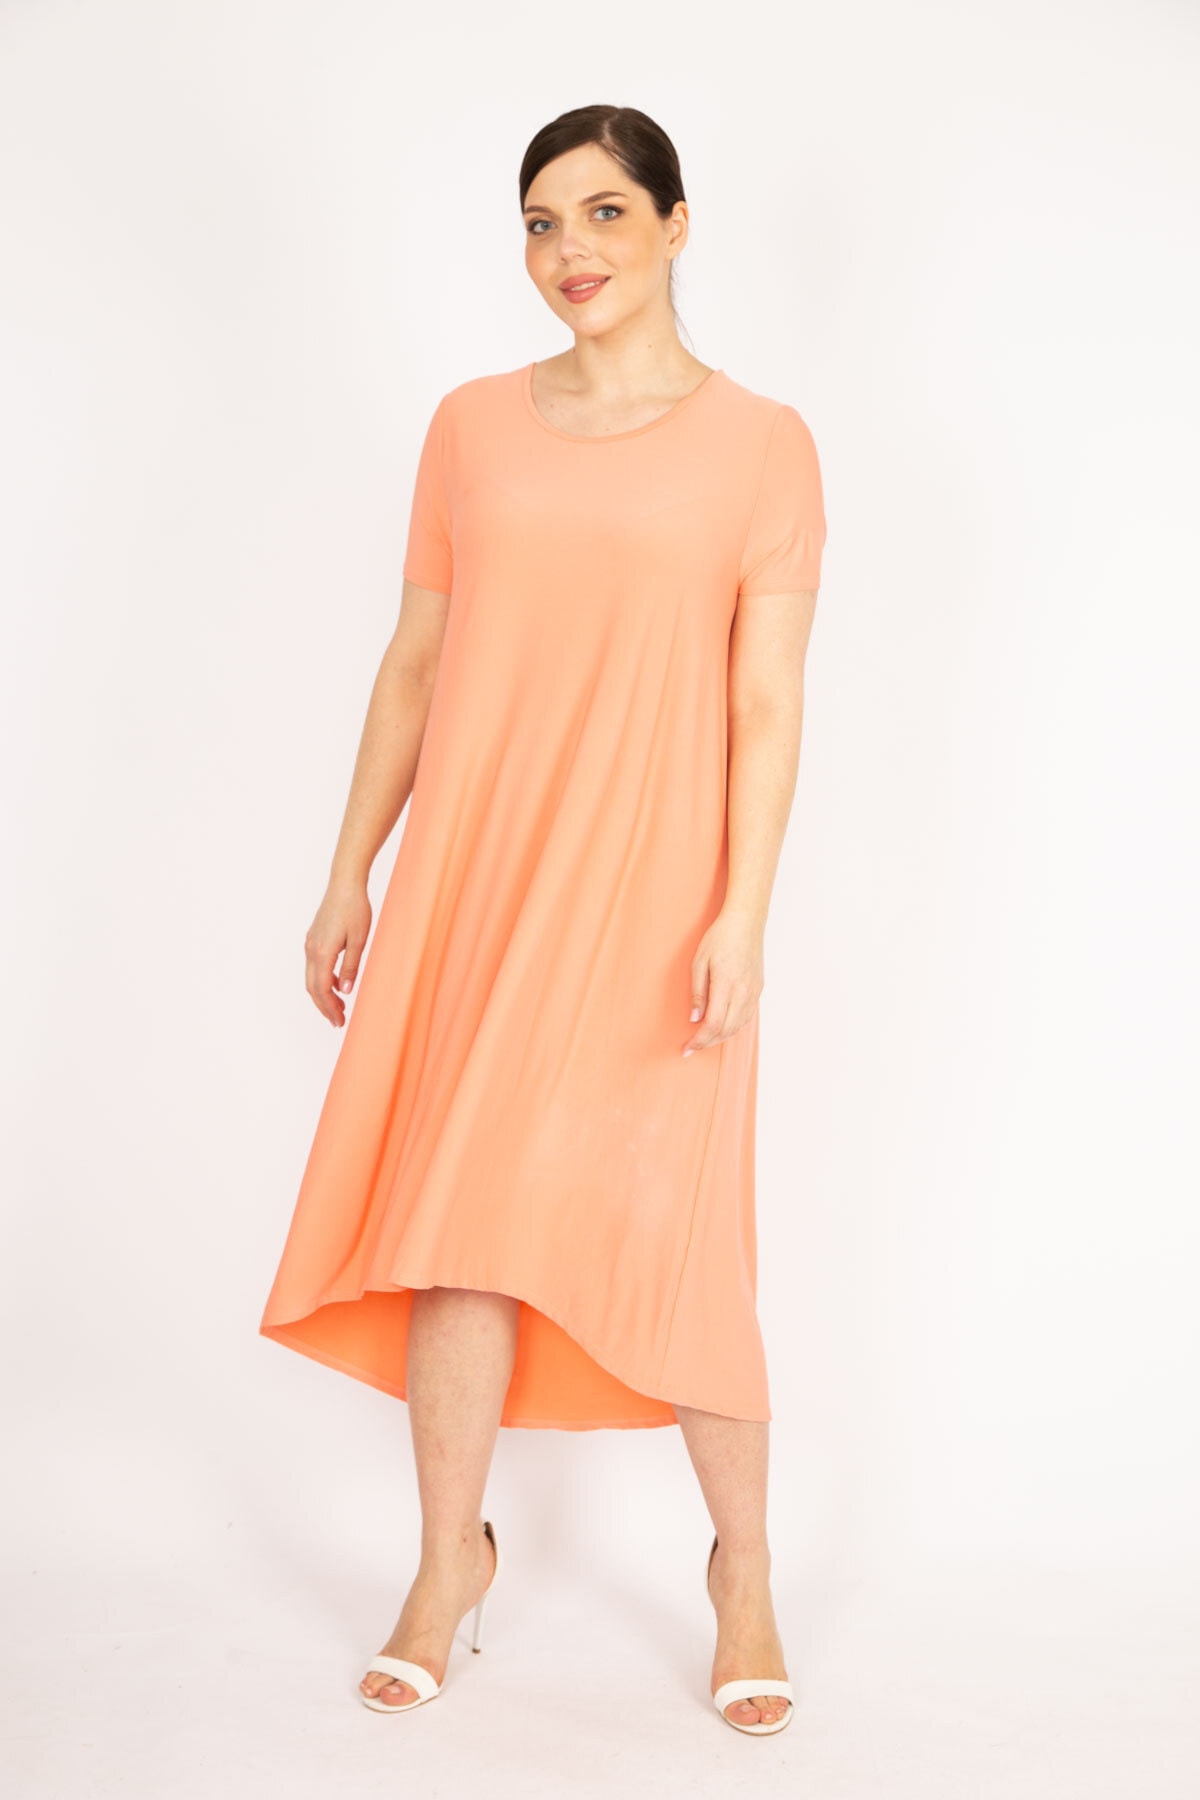 Maxi Dress for Women, Shift Dress for Women with Sleeves, Aline